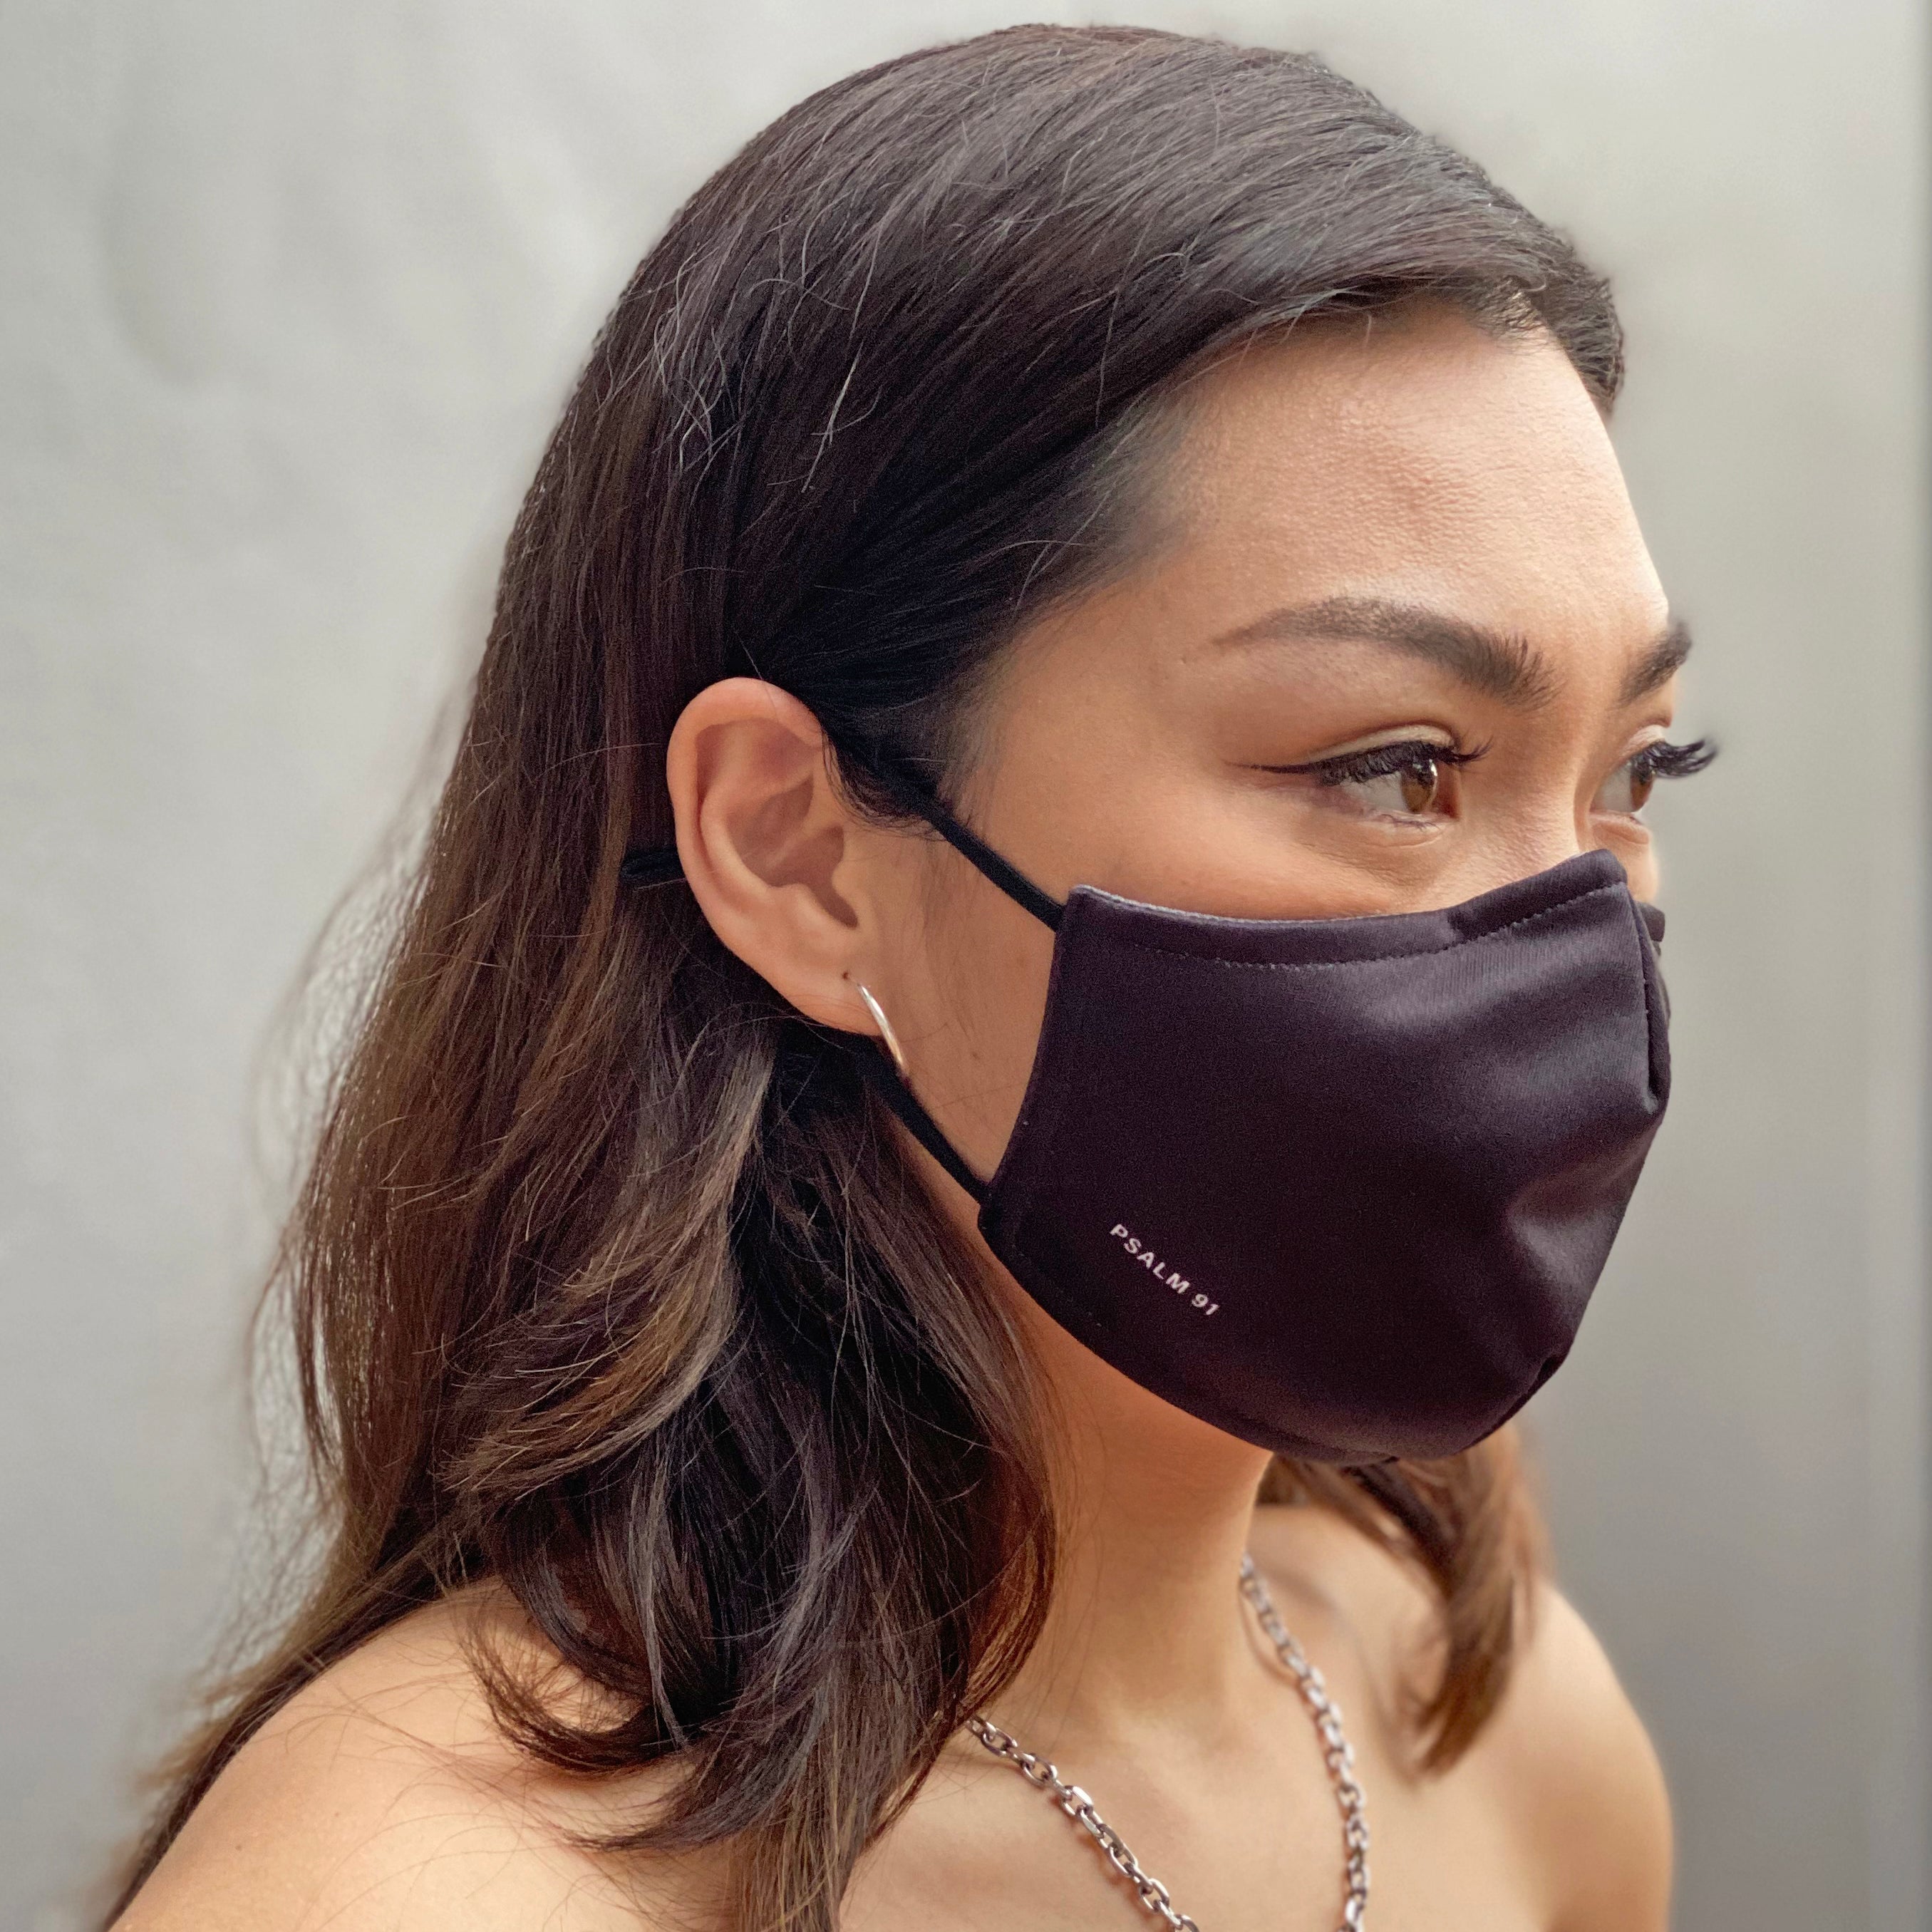 Christian Woman in Black Psalm 91 Face Mask: Christian Bible Verse Face Mask, Shop for Christian Gift Singapore